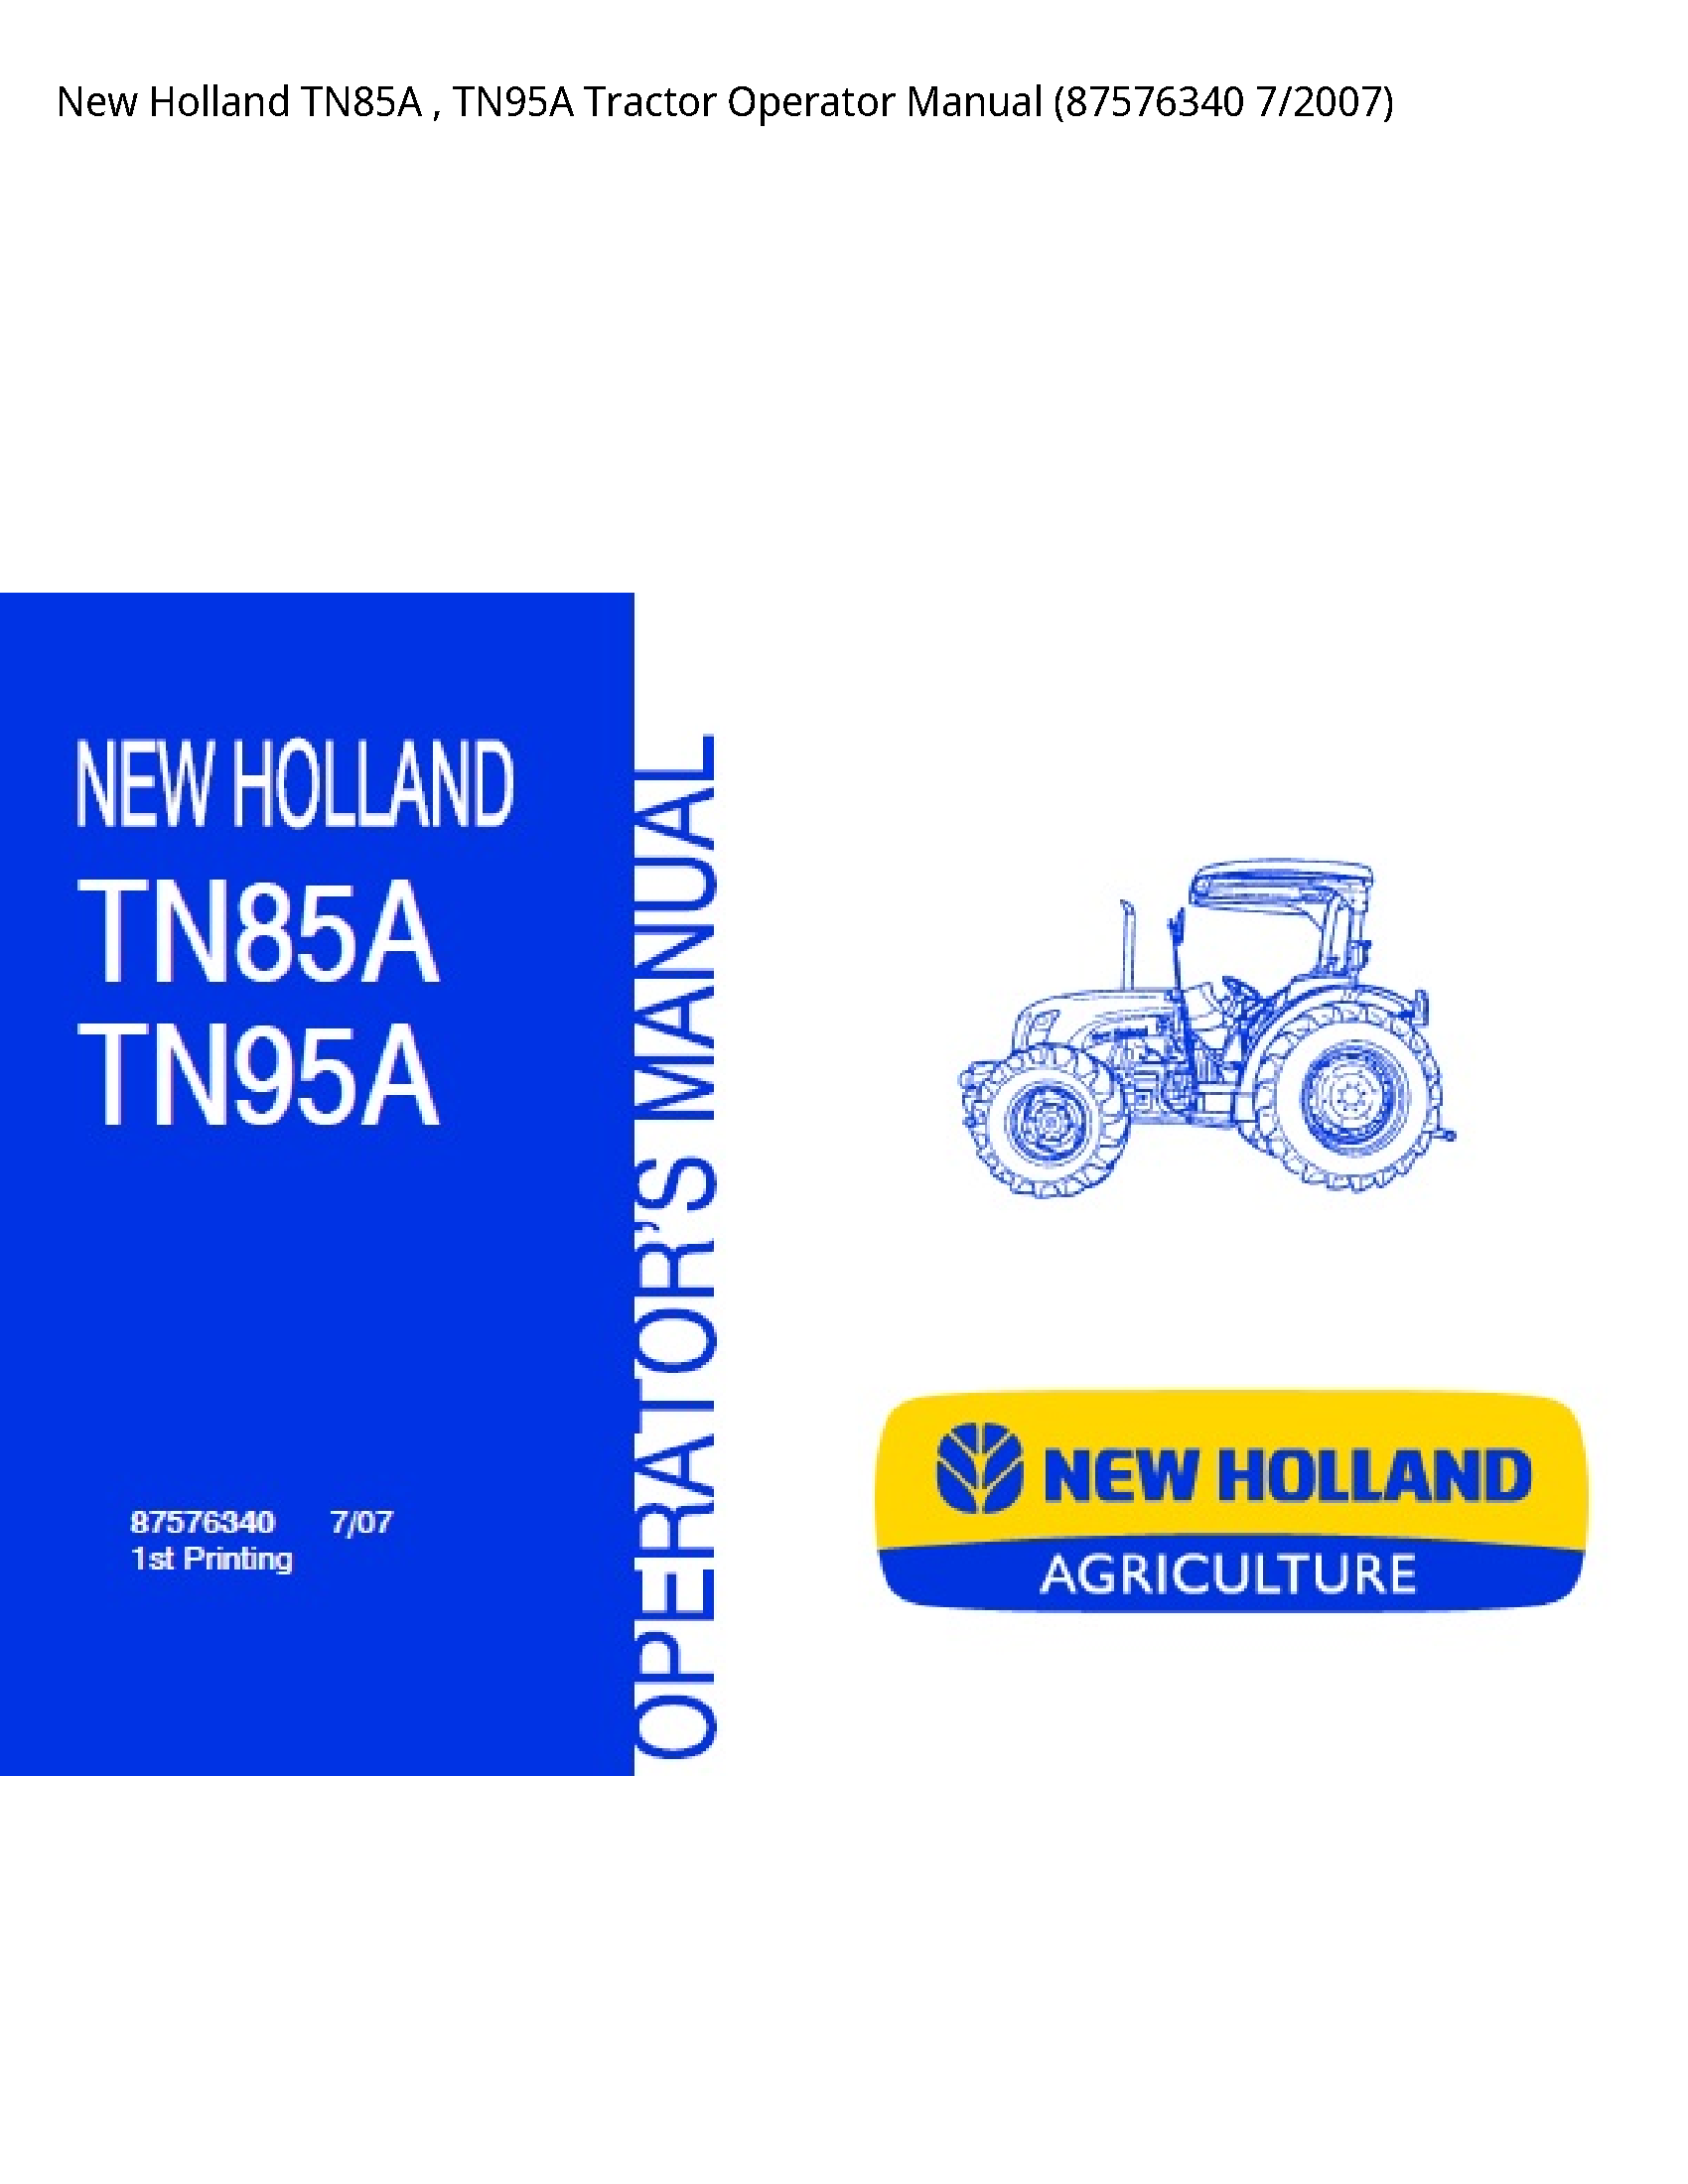 New Holland TN85A Tractor Operator manual